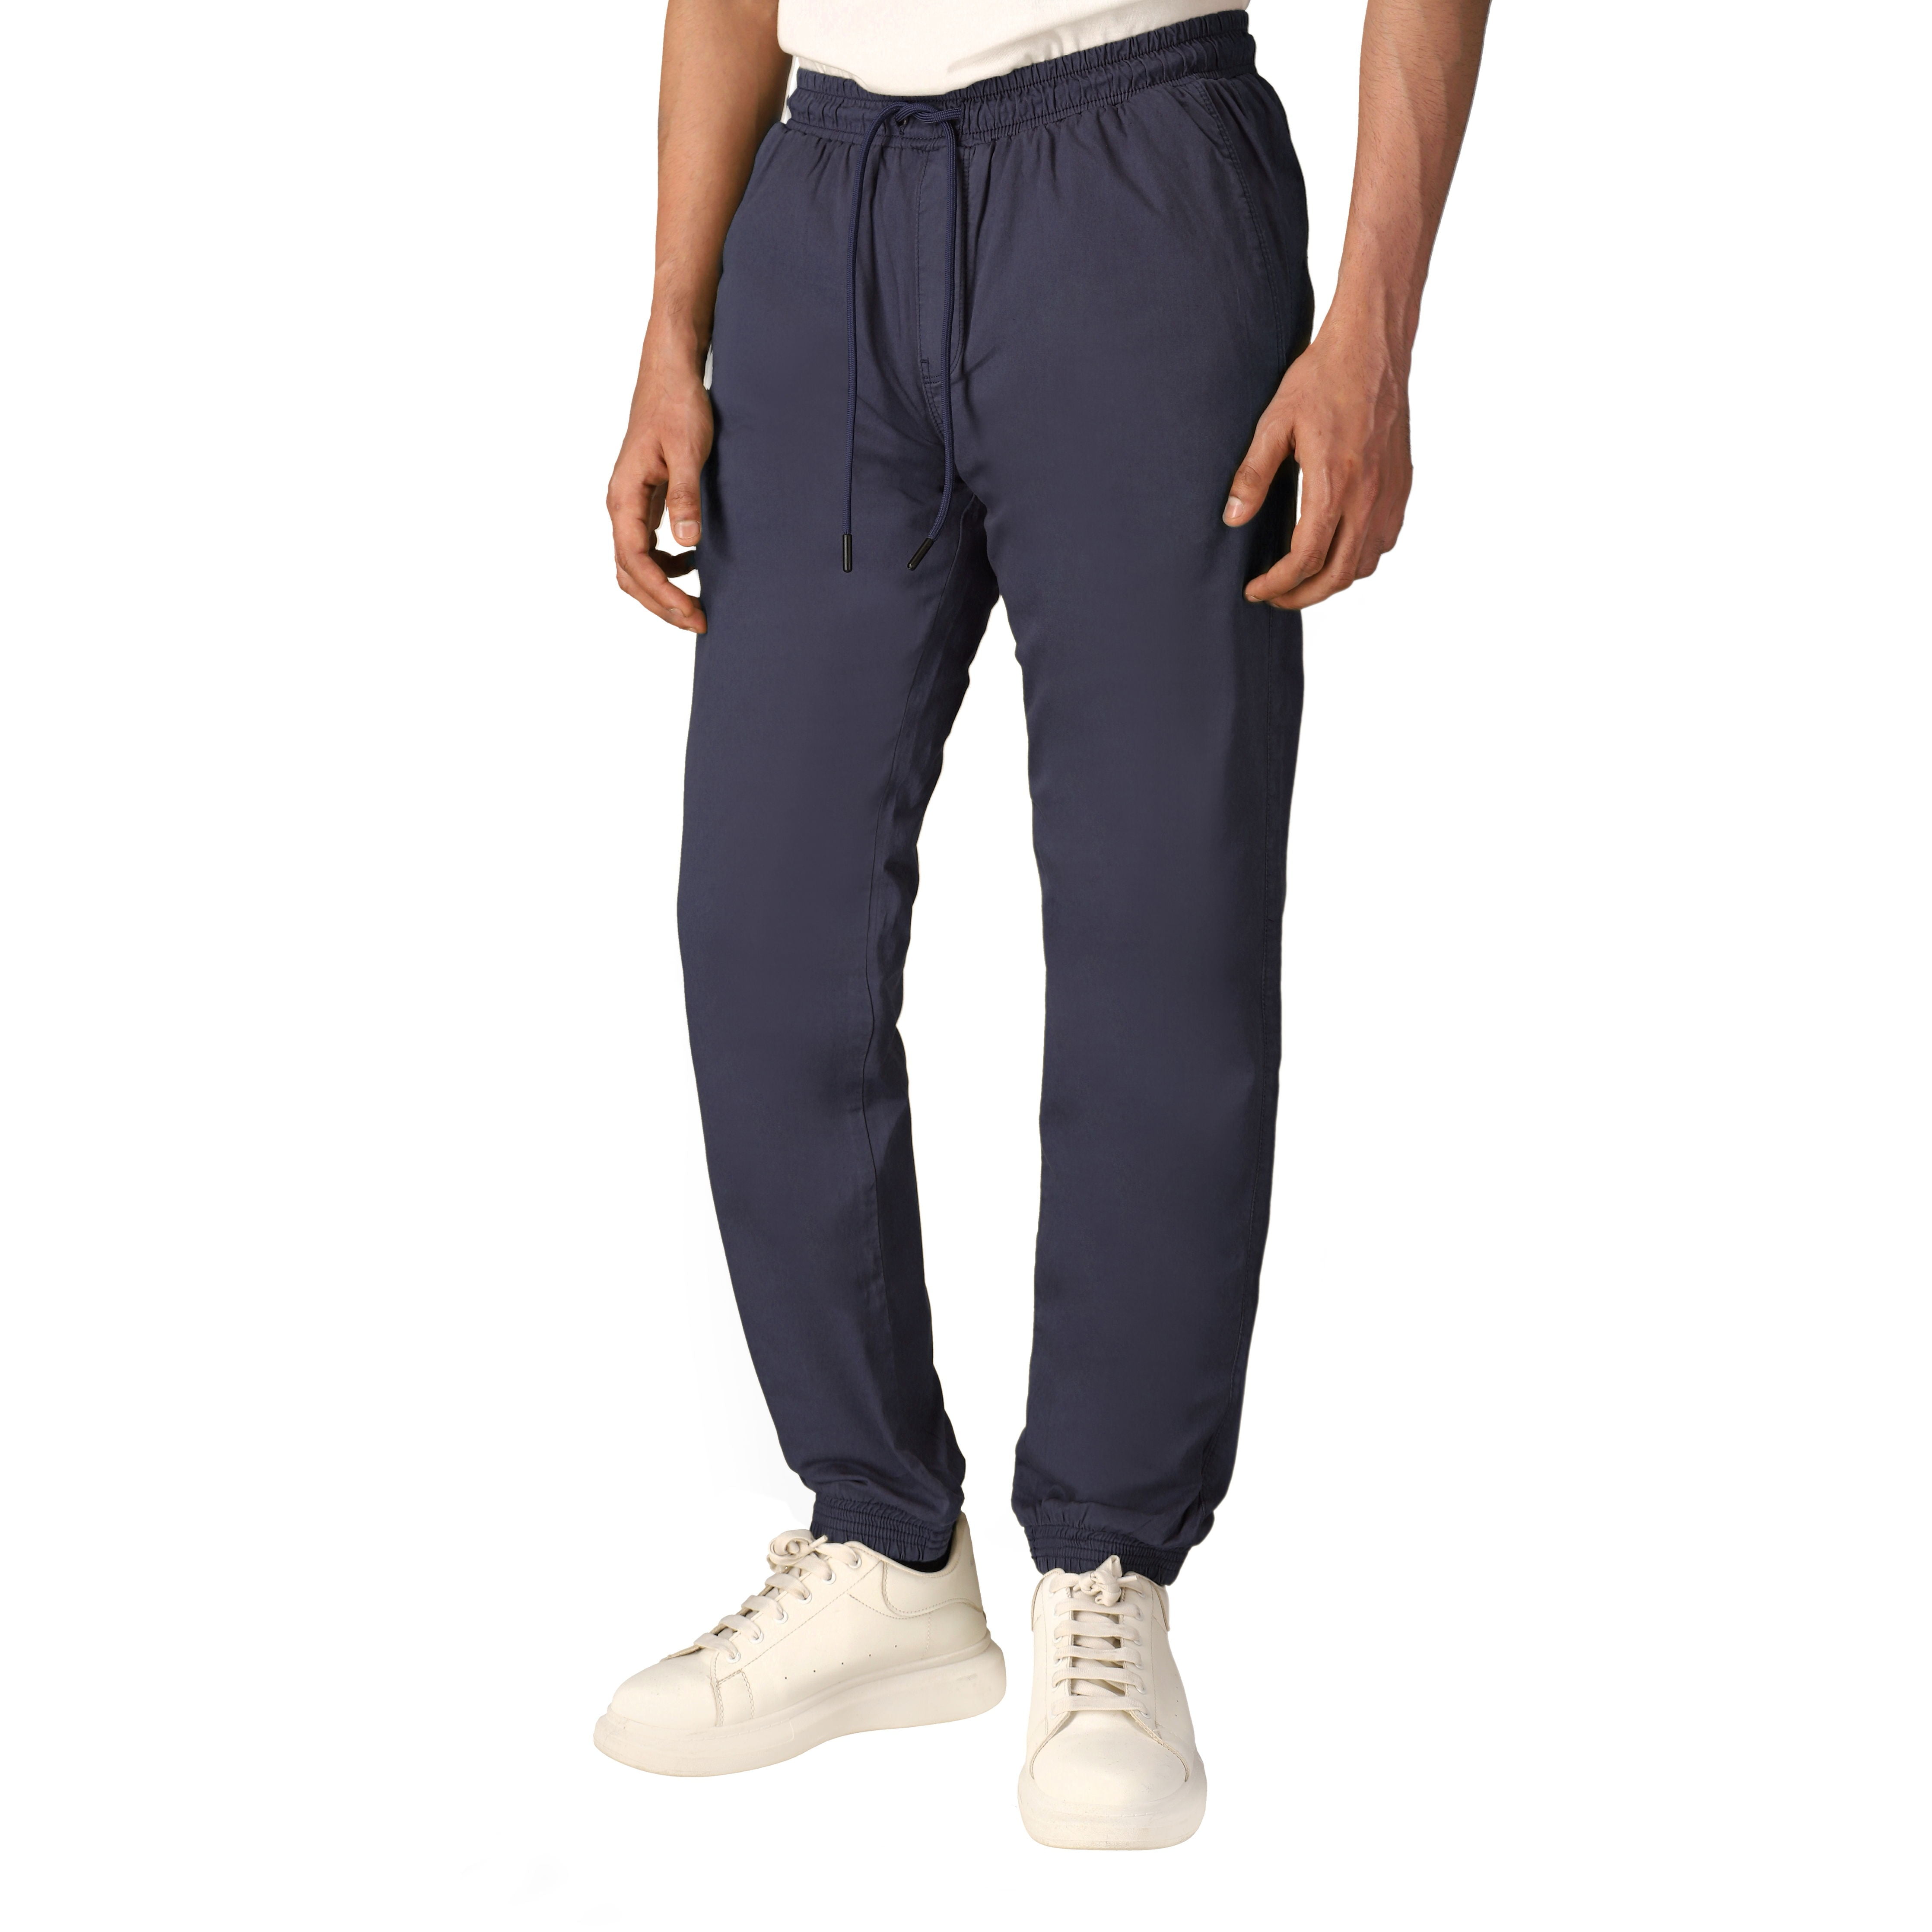 WHITEDUCK Jogger Pants for Men - Relaxed Fit Cotton Drawstring ...